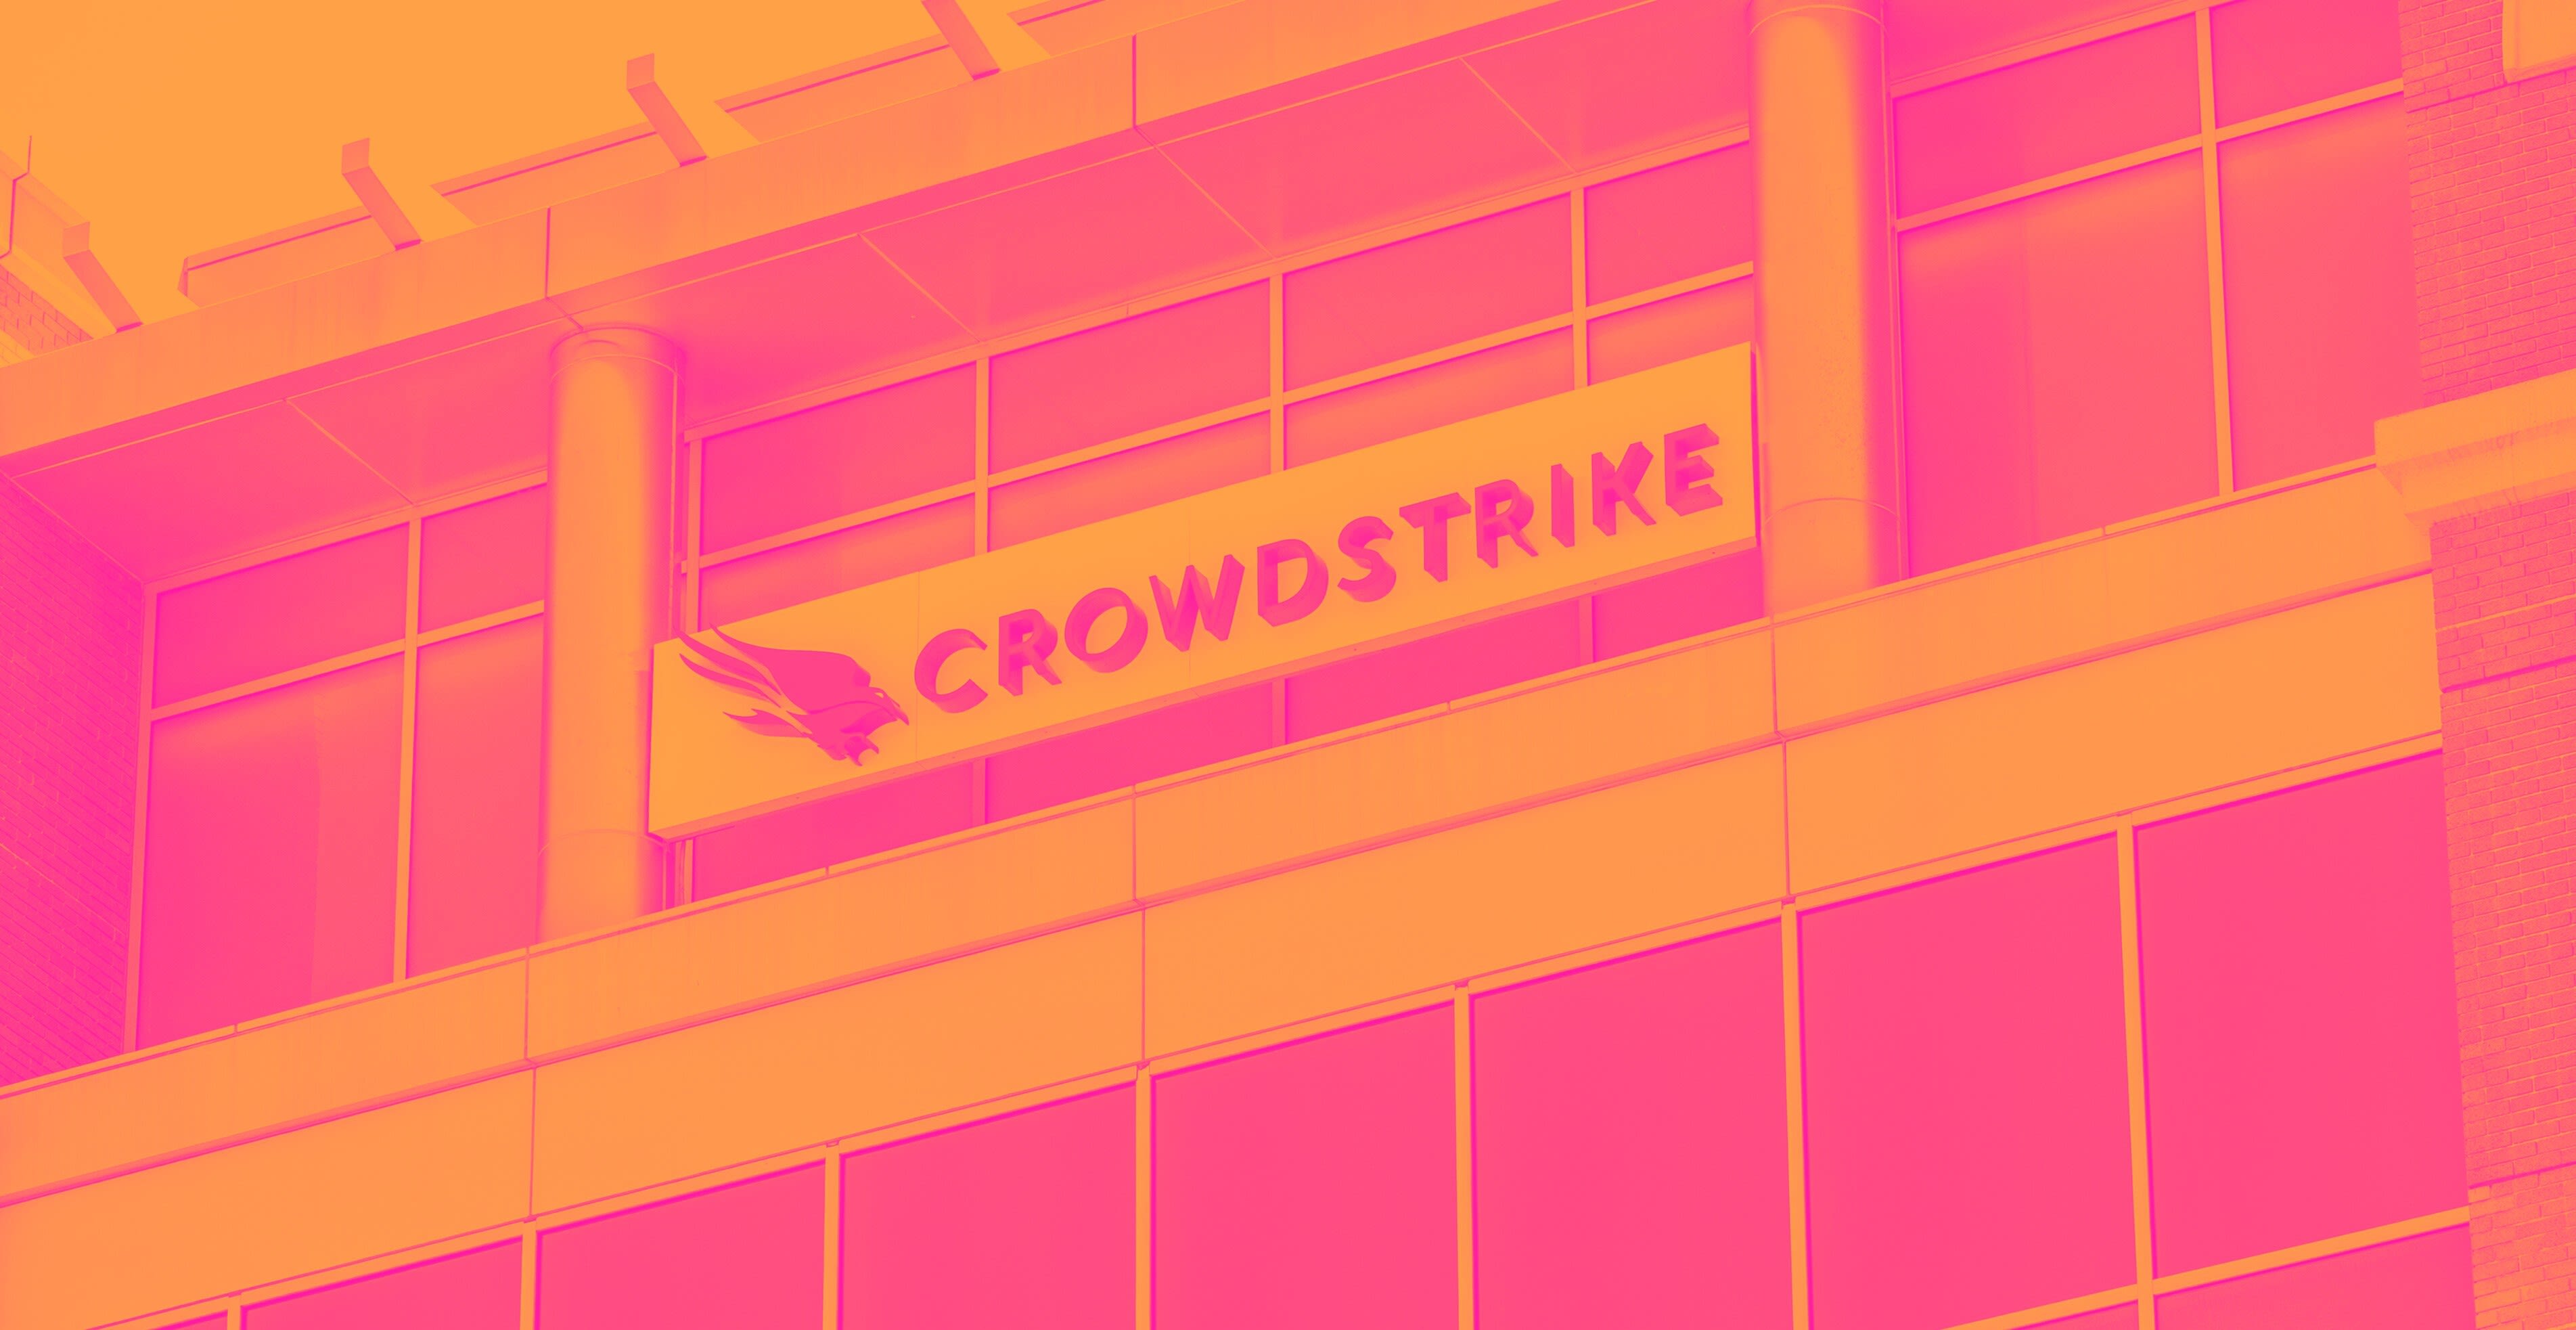 CrowdStrike (CRWD) Q1 Earnings Report Preview: What To Look For